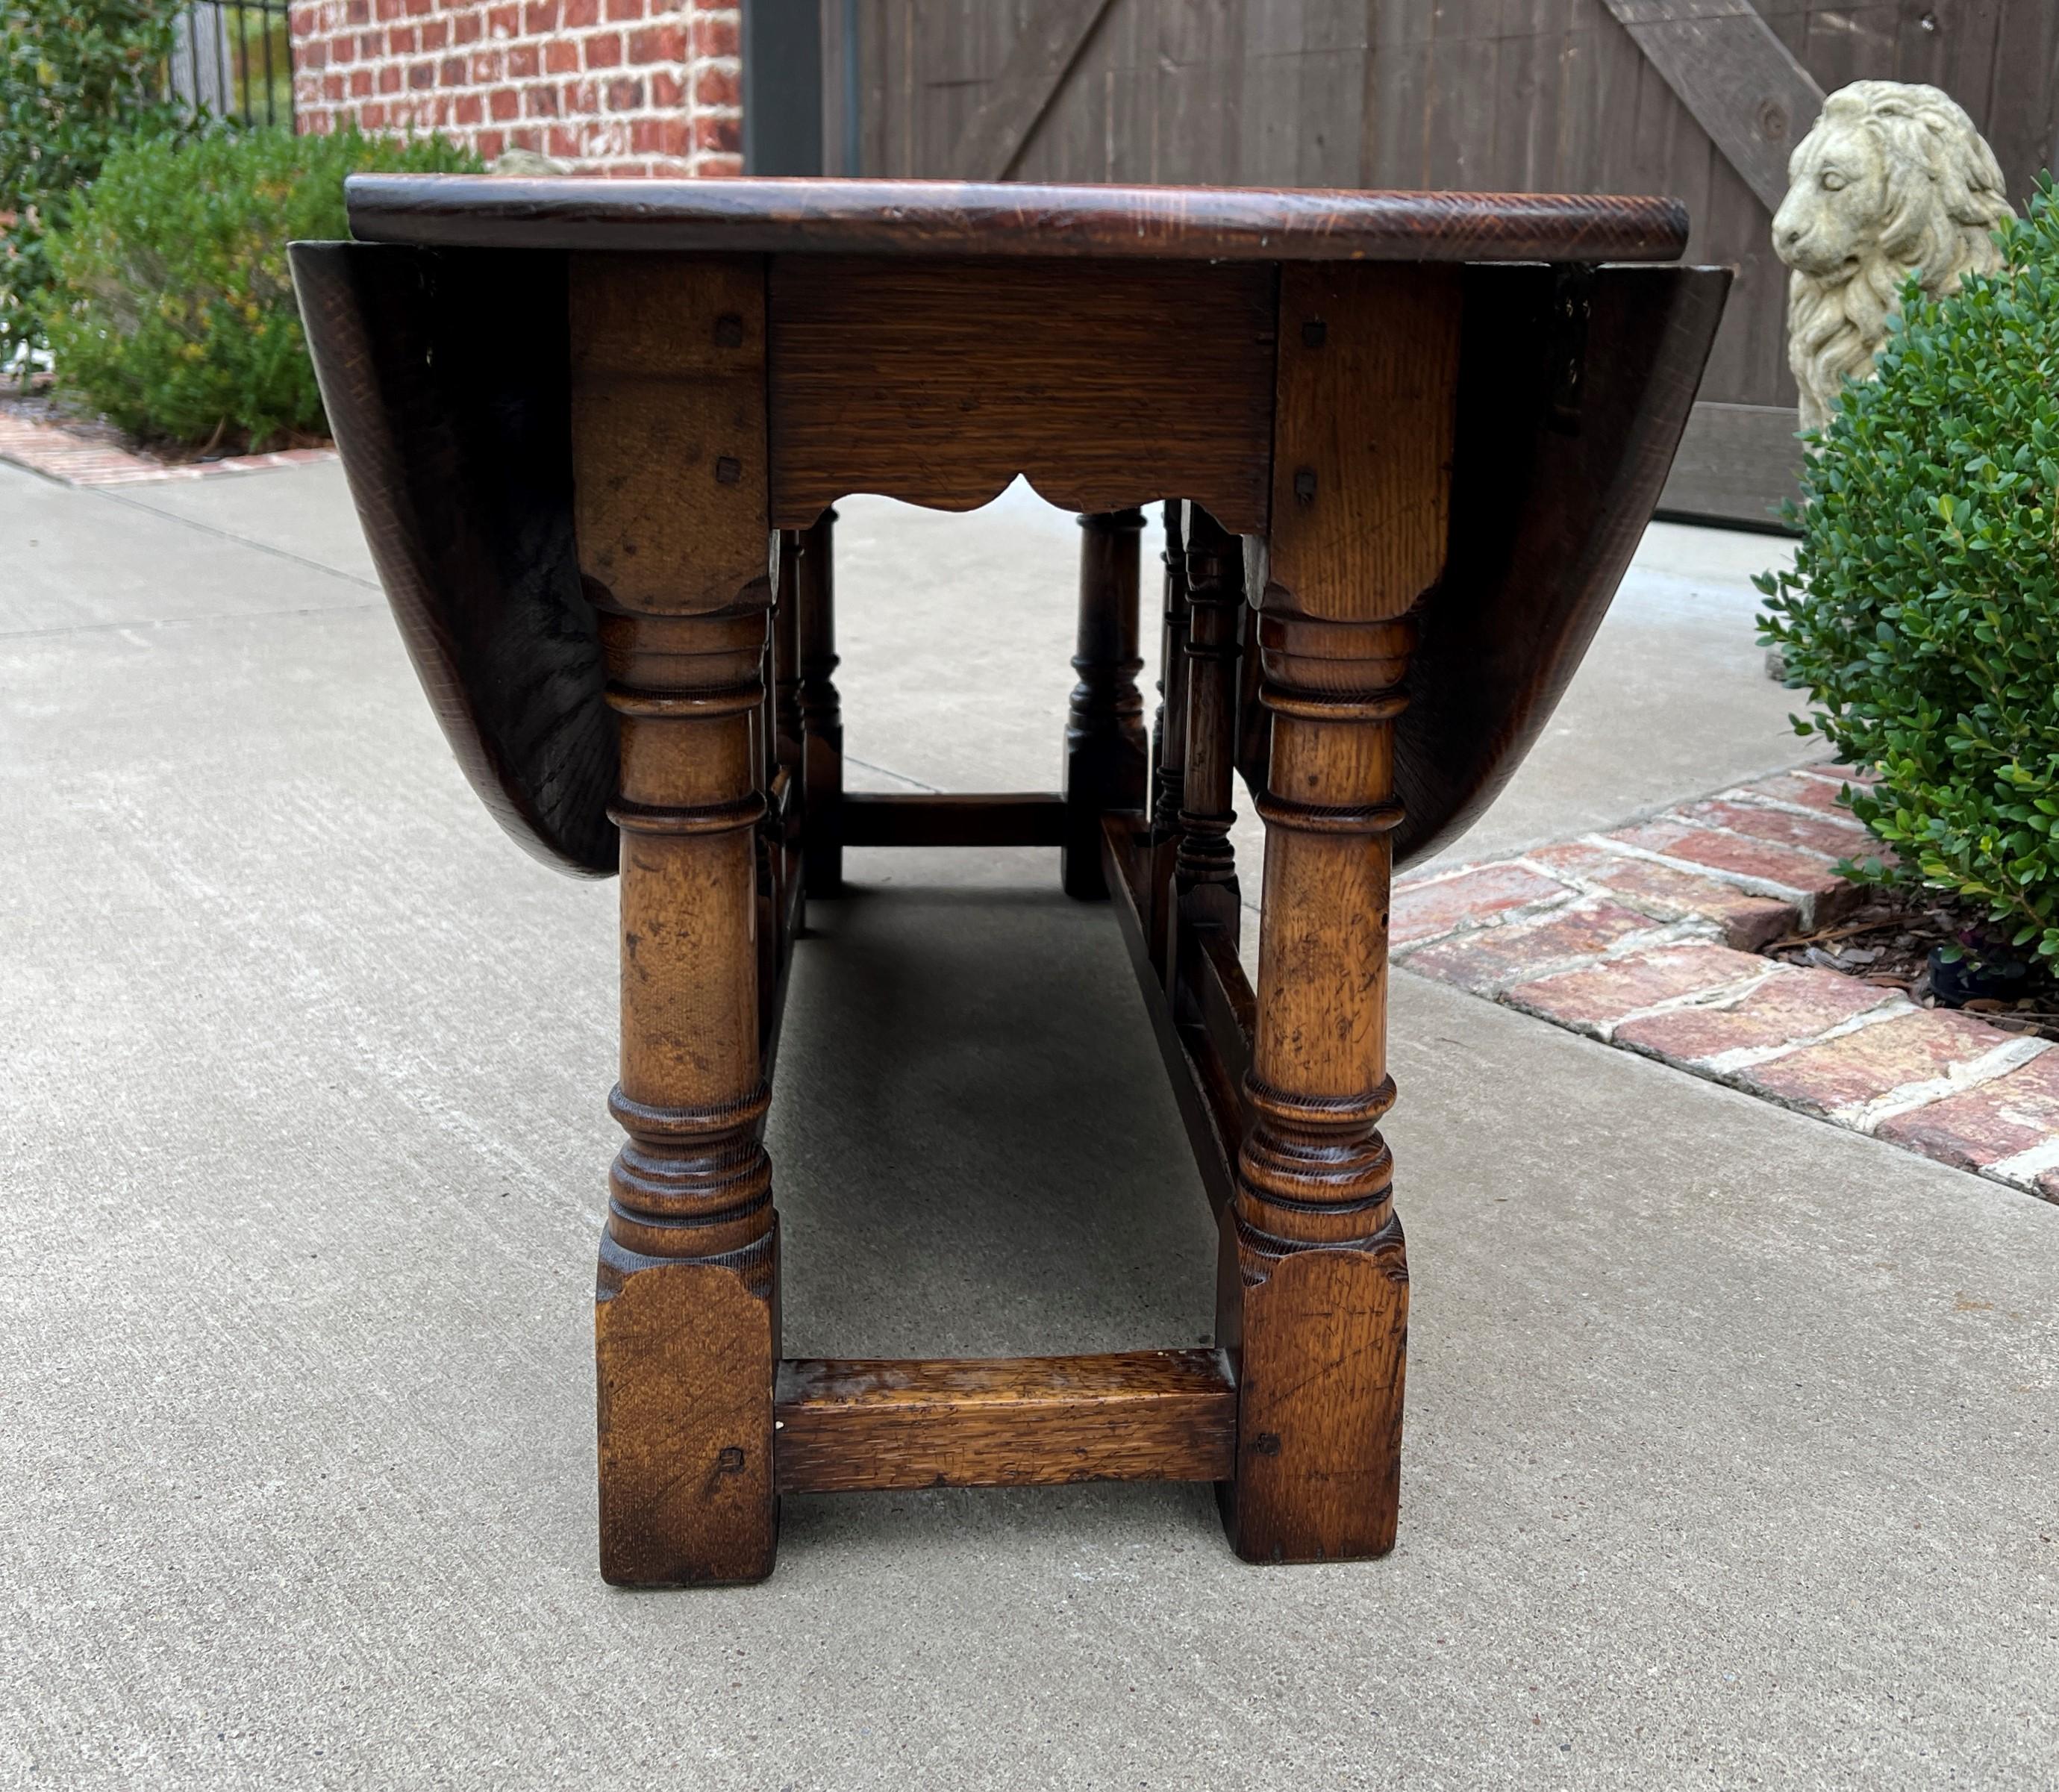 Early 20th Century Antique English Coffee Table Bench Drop Leaf Gate Leg Oak Pegged C. 1900 For Sale